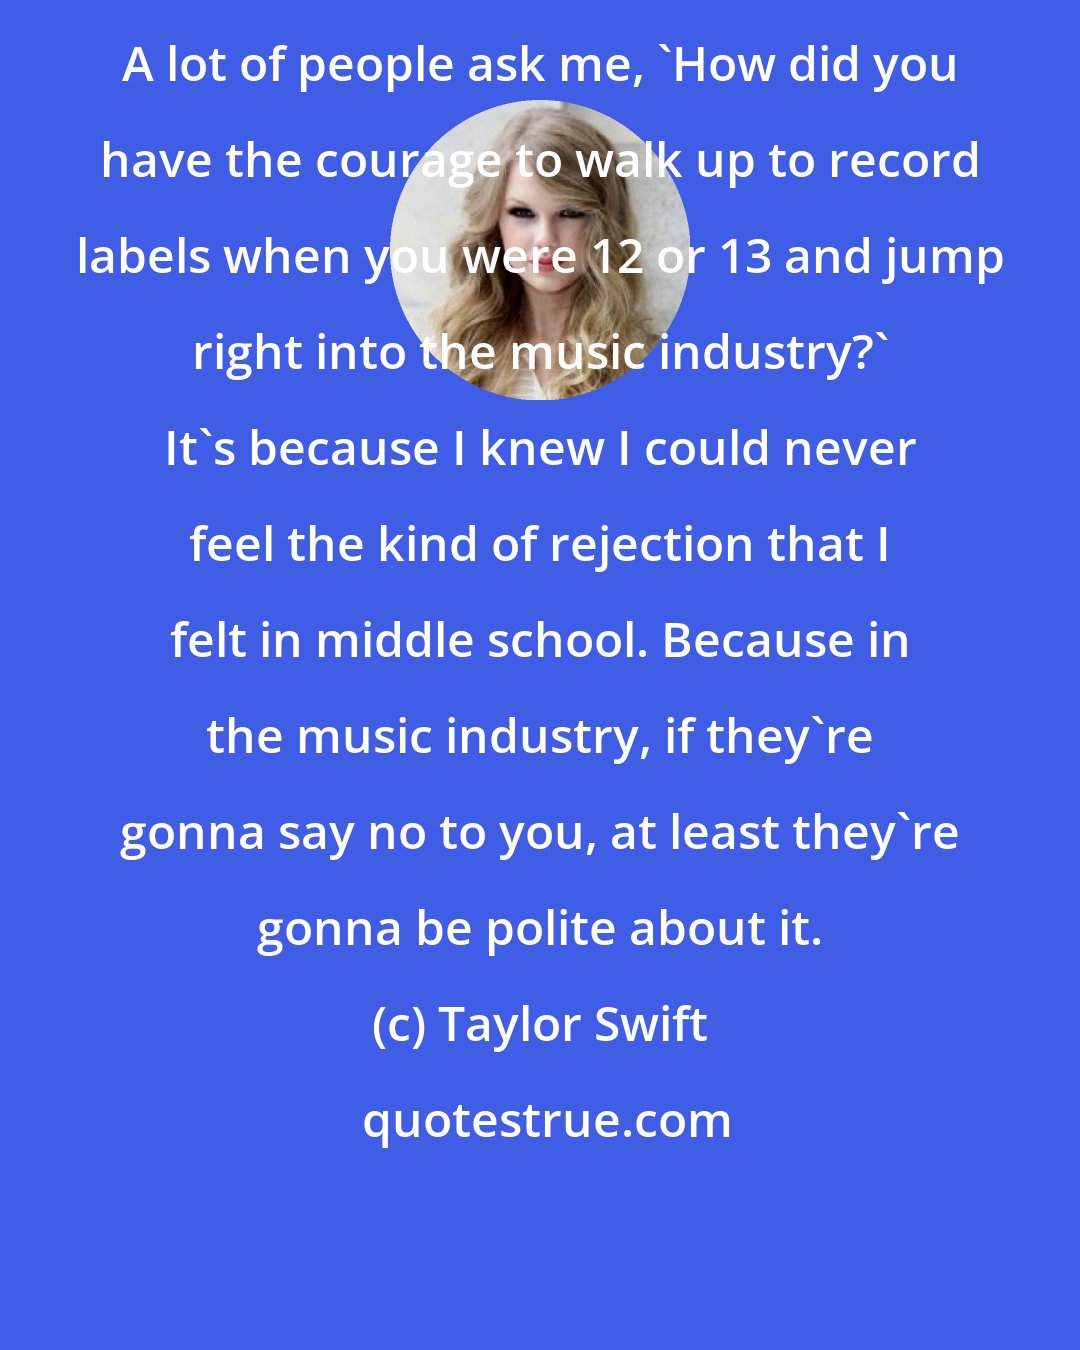 Taylor Swift: A lot of people ask me, 'How did you have the courage to walk up to record labels when you were 12 or 13 and jump right into the music industry?' It's because I knew I could never feel the kind of rejection that I felt in middle school. Because in the music industry, if they're gonna say no to you, at least they're gonna be polite about it.